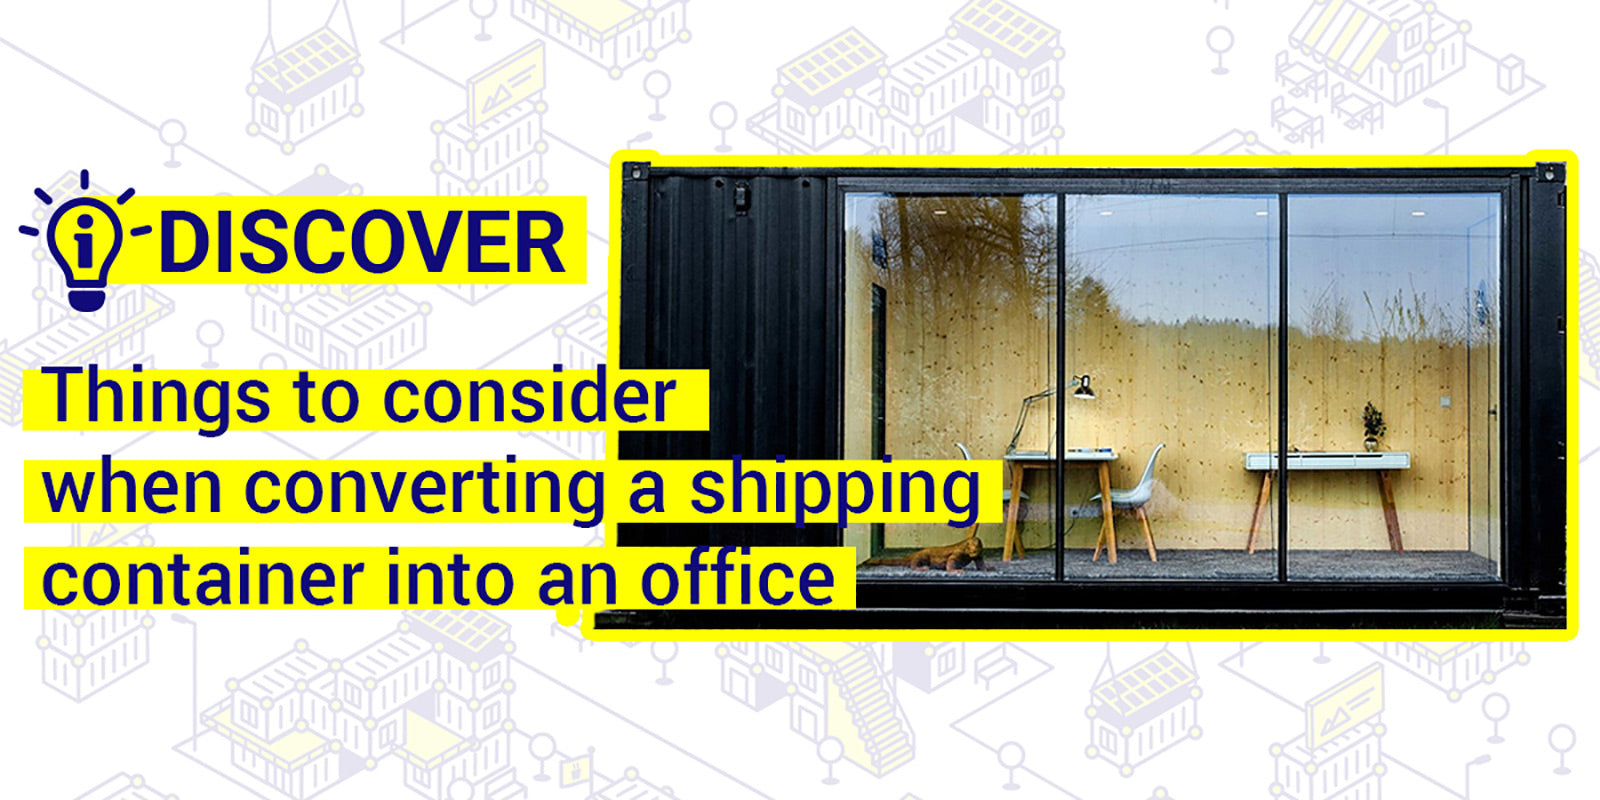 Things to consider when converting a shipping container into an office